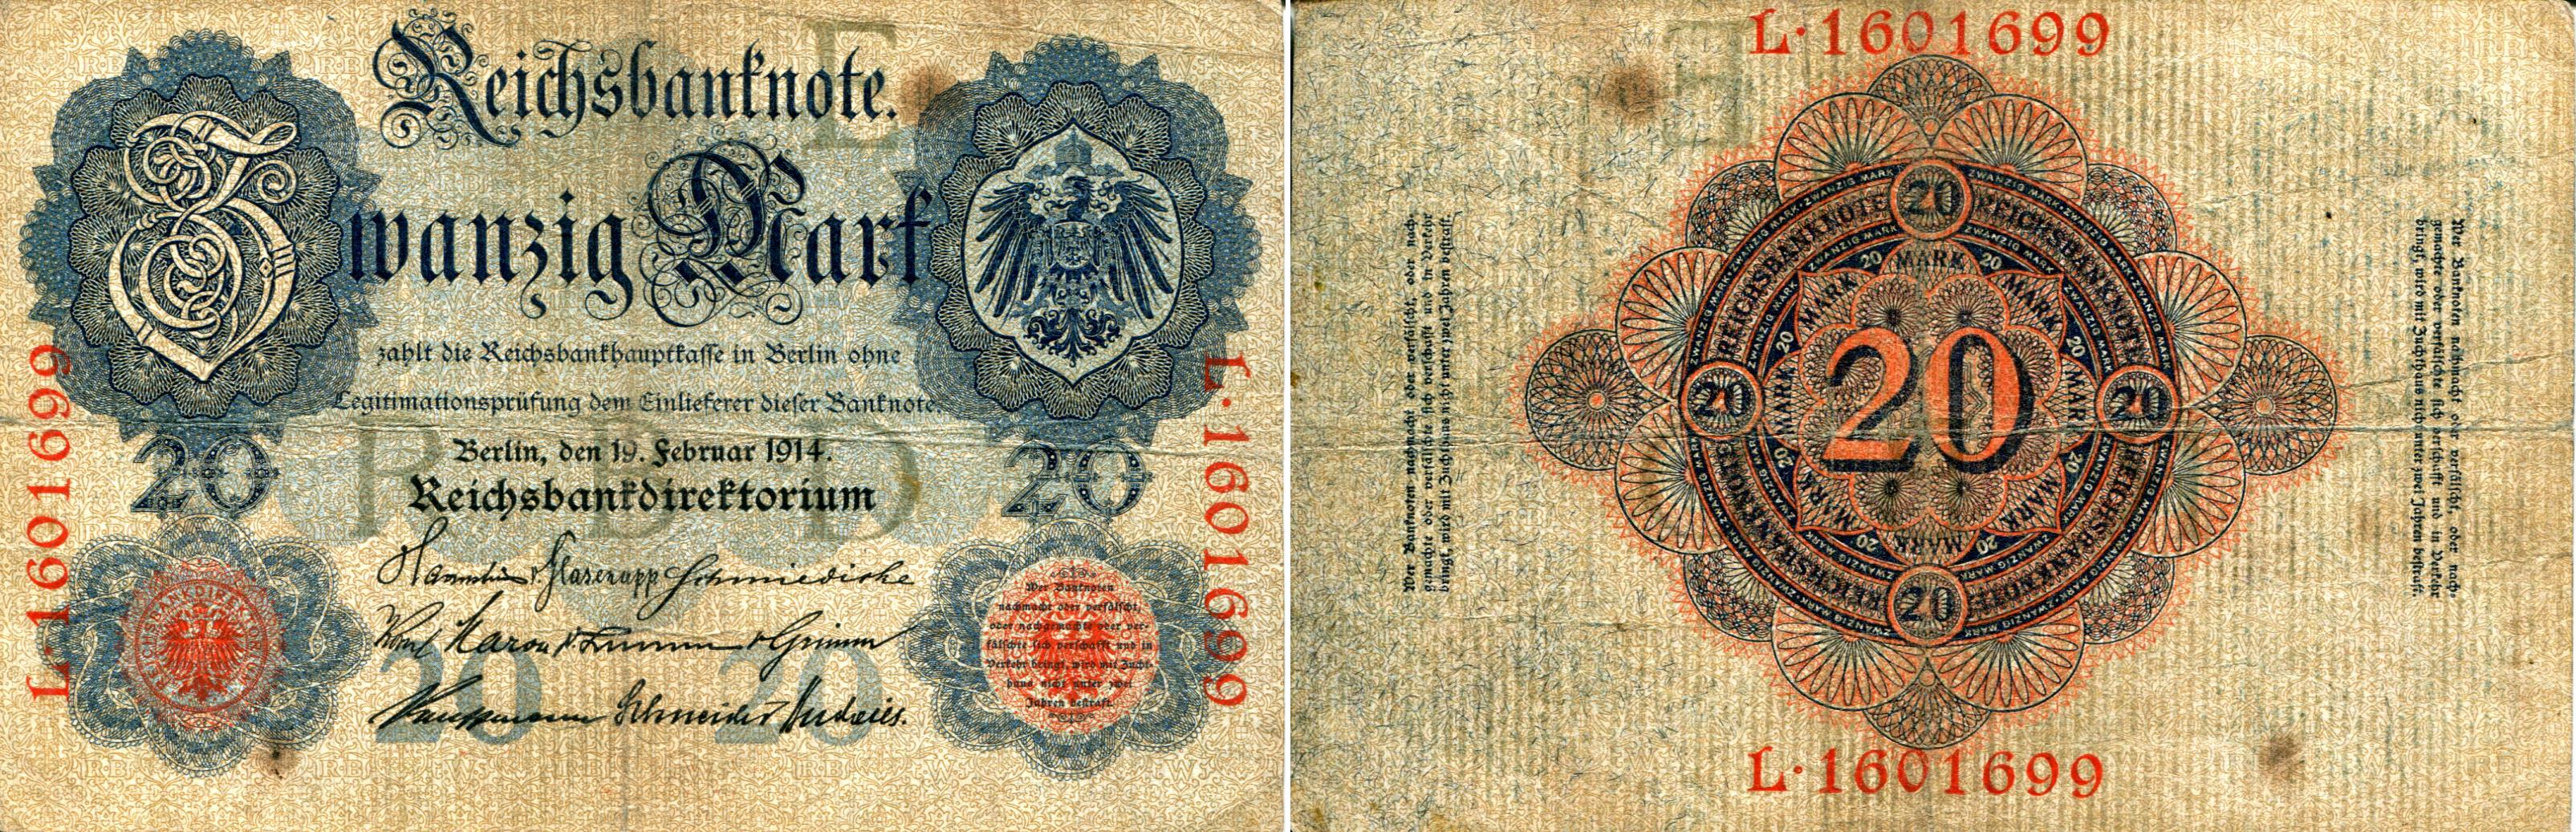 German coins and currency